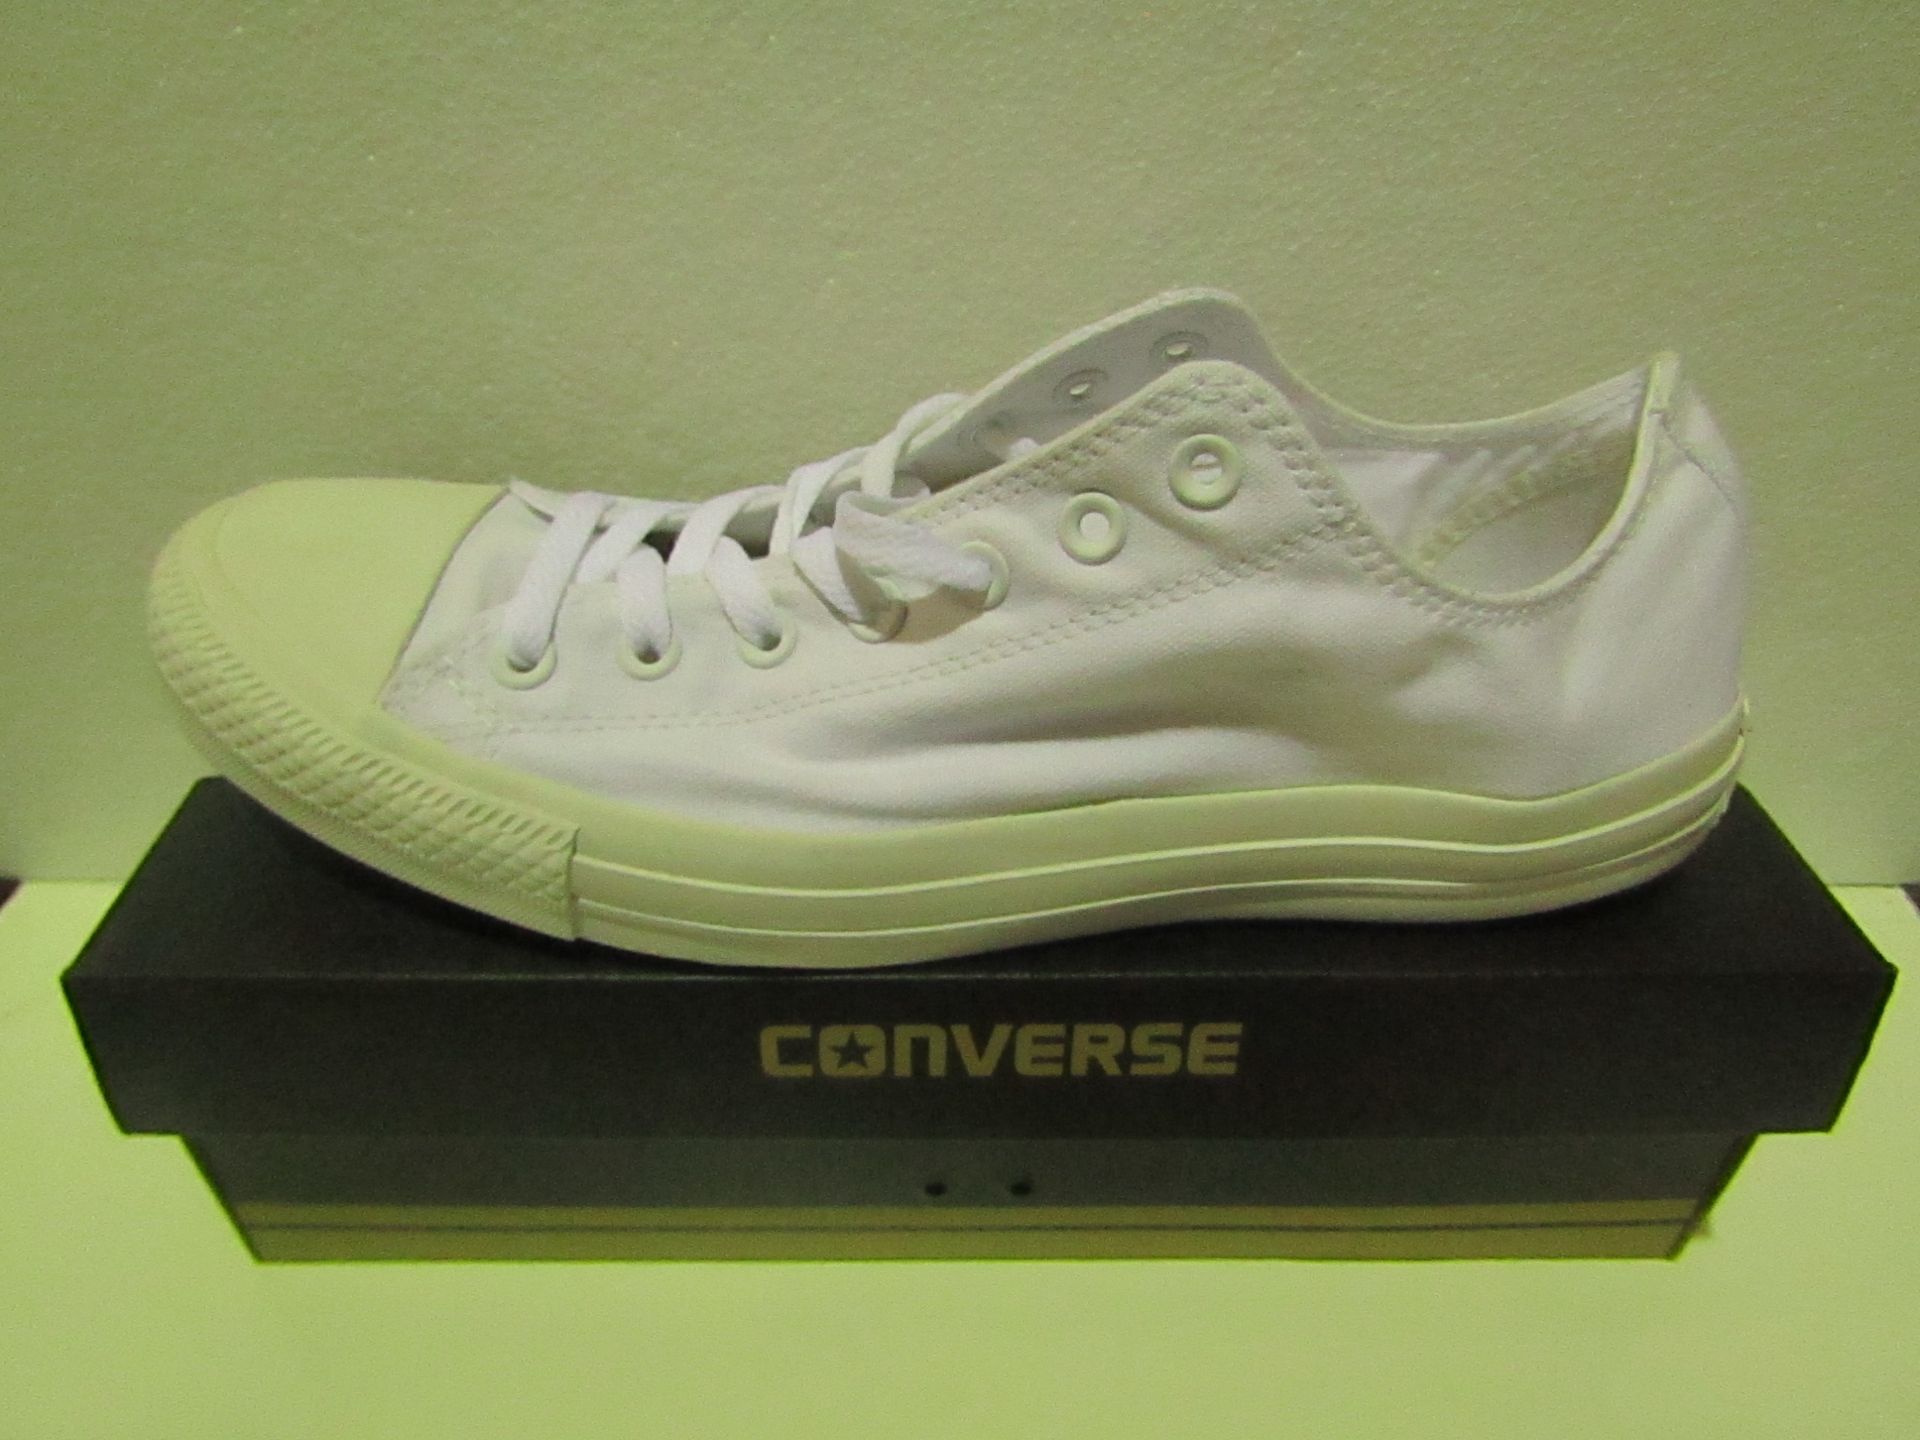 Converse All Star White Canvas Trainer size UK 12 new & boxed see image for design